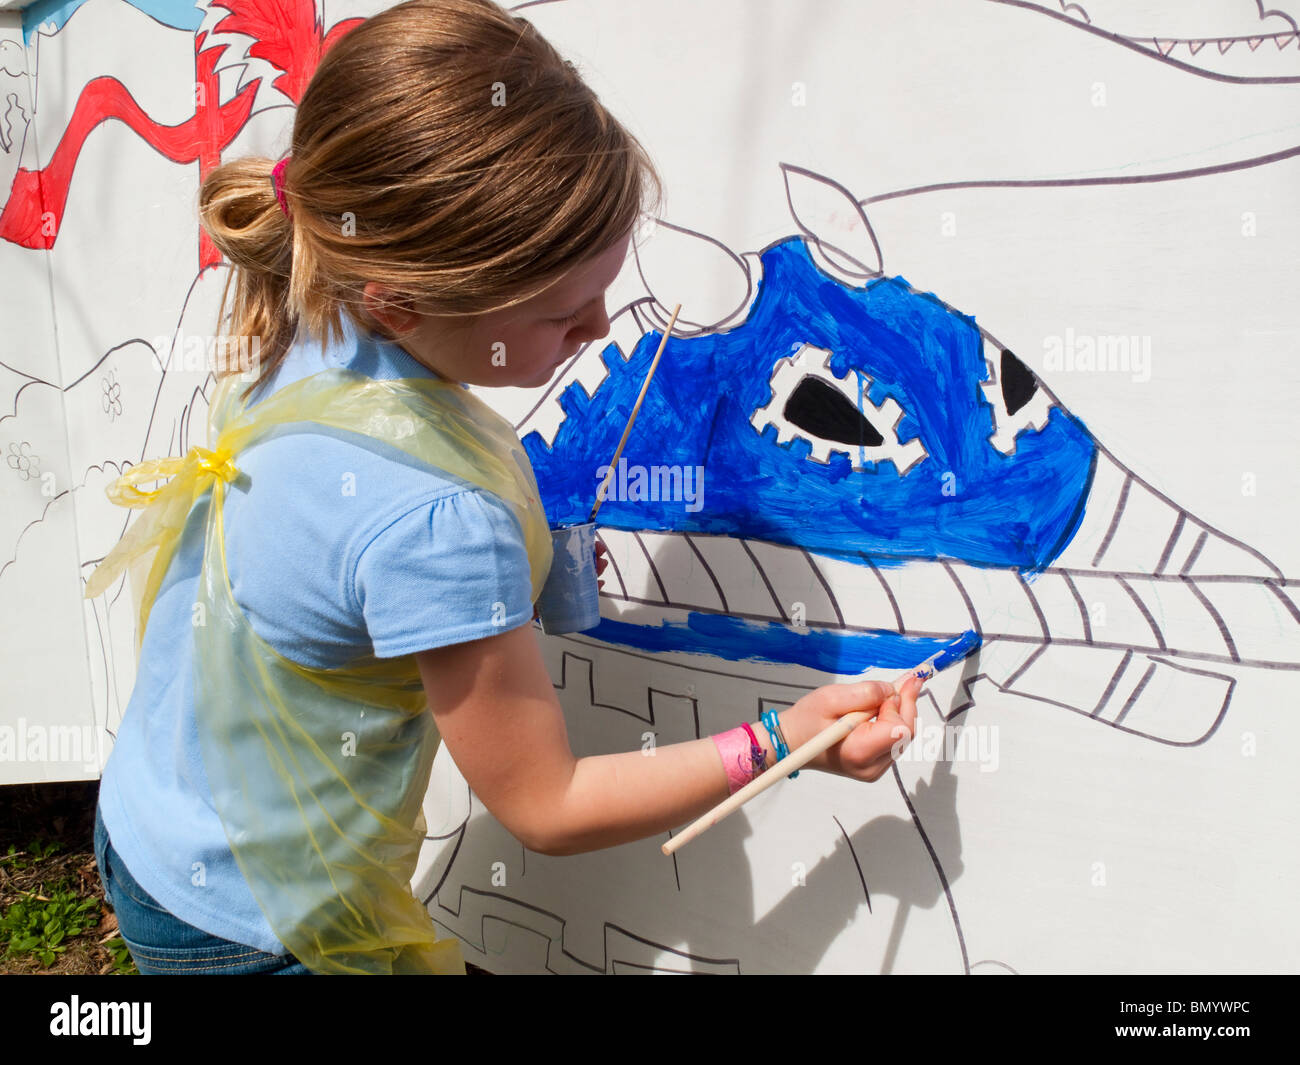 https://c8.alamy.com/comp/BMYWPC/eight-year-old-blonde-girl-painting-a-mural-on-a-wall-BMYWPC.jpg